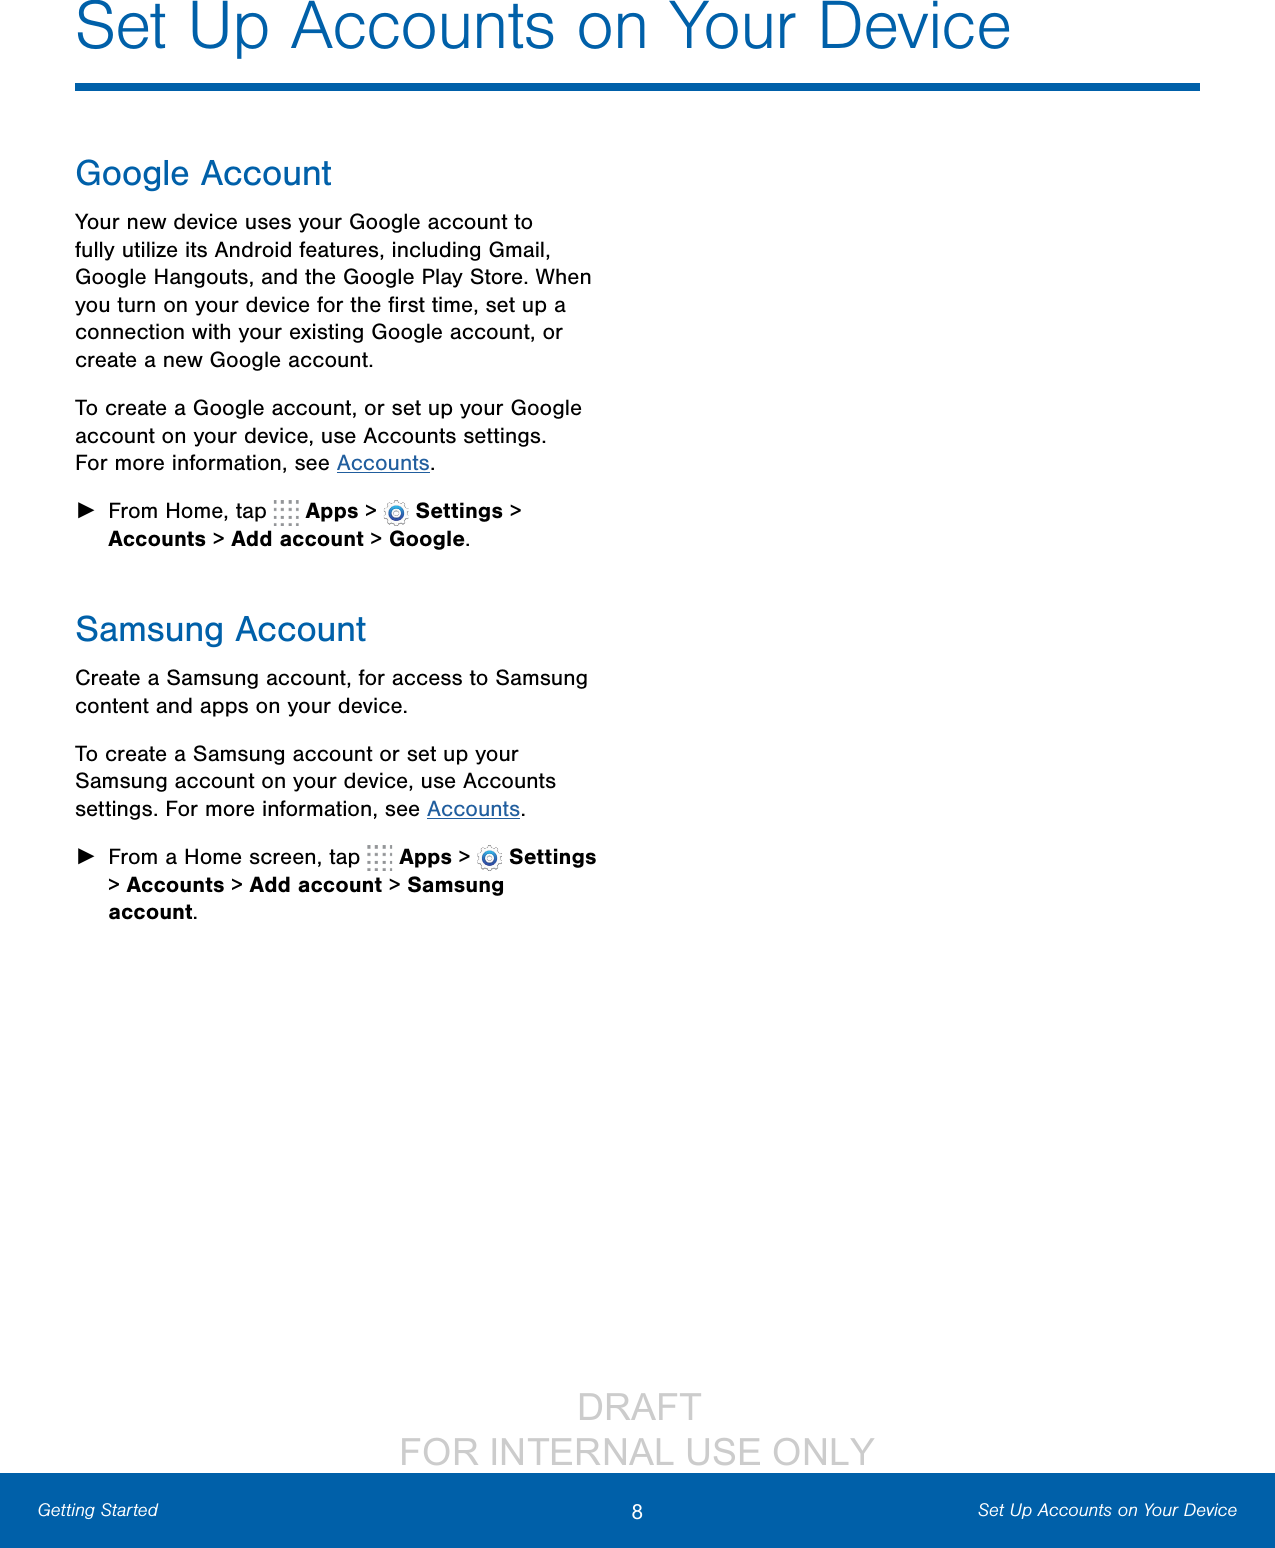                  DRAFT FOR INTERNAL USE ONLY8Set Up Accounts on Your DeviceGetting StartedSet Up Accounts on Your DeviceGoogle AccountYour new device uses your Google account to fully utilize its Android features, including Gmail, Google Hangouts, and the Google Play Store. When you turn on your device for the ﬁrst time, set up a connection with your existing Google account, or create a new Google account.To create a Google account, or set up your Google account on your device, use Accounts settings. Formore information, see Accounts. ►From Home, tap   Apps &gt;  Settings &gt; Accounts &gt; Add account &gt; Google.Samsung AccountCreate a Samsung account, for access to Samsung content and apps on your device. To create a Samsung account or set up your Samsung account on your device, use Accounts settings. Formore information, see Accounts. ►From a Home screen, tap   Apps &gt;  Settings &gt; Accounts &gt; Add account &gt; Samsung account.